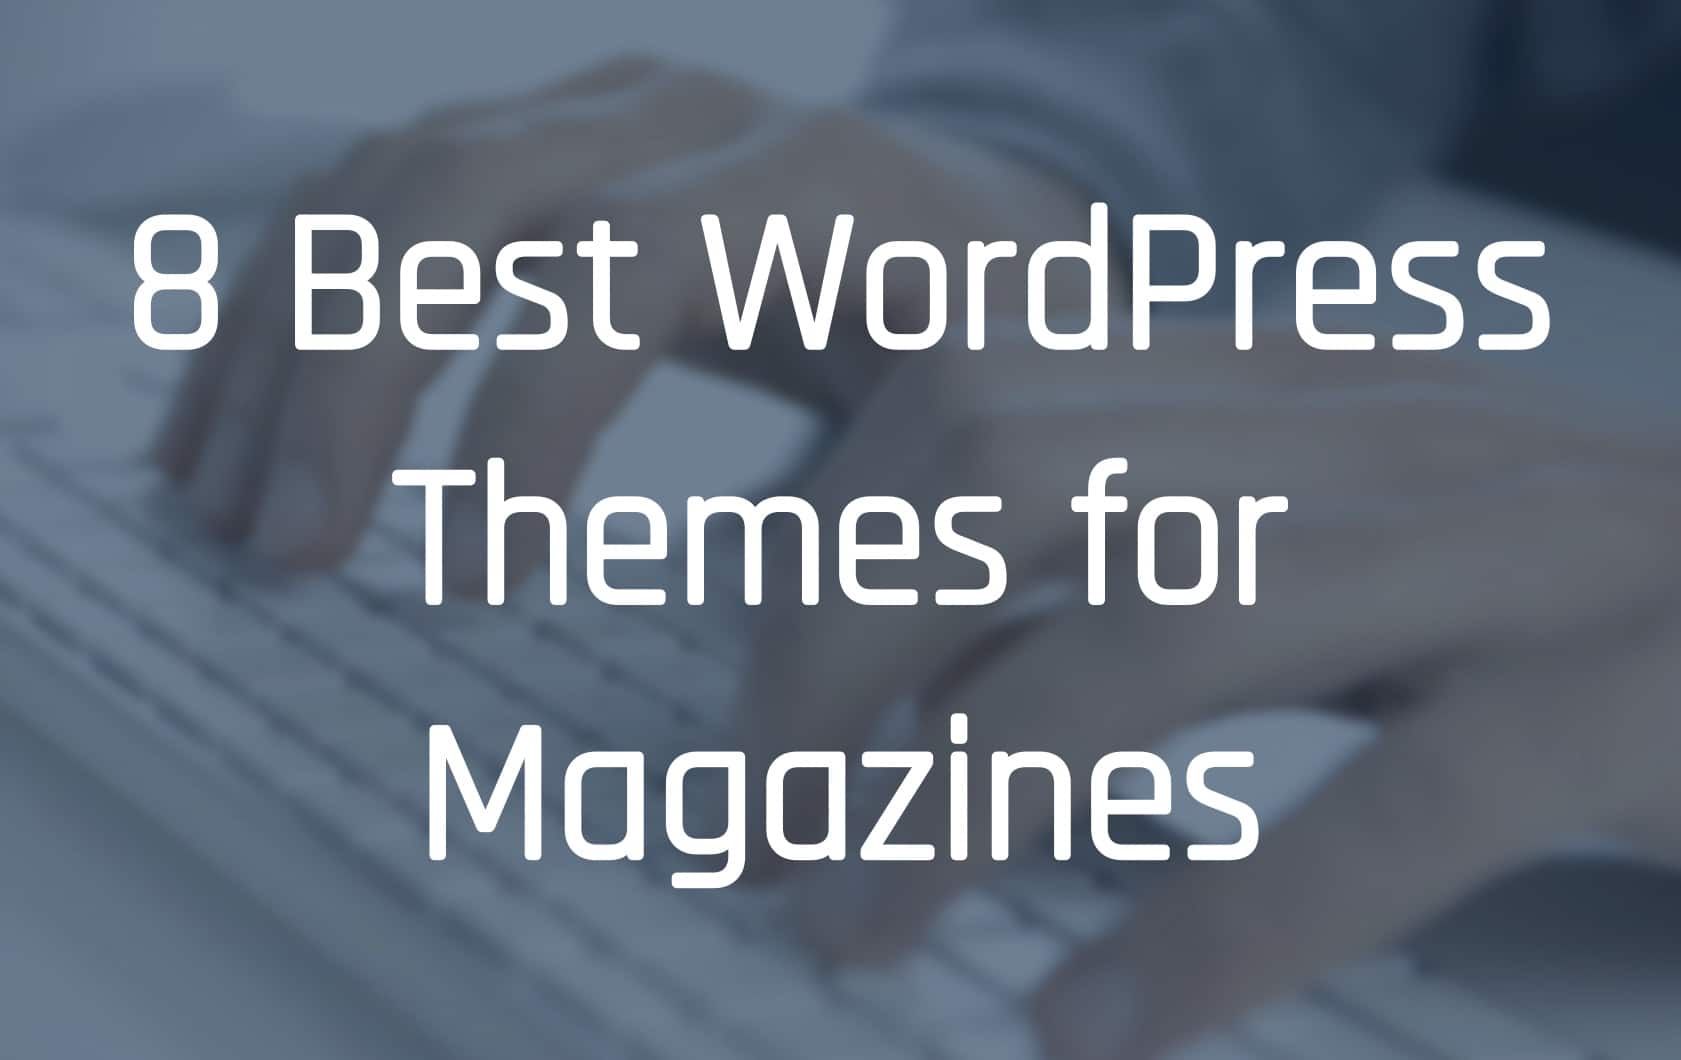 This image is showcasing eight of the best WordPress themes for magazines.